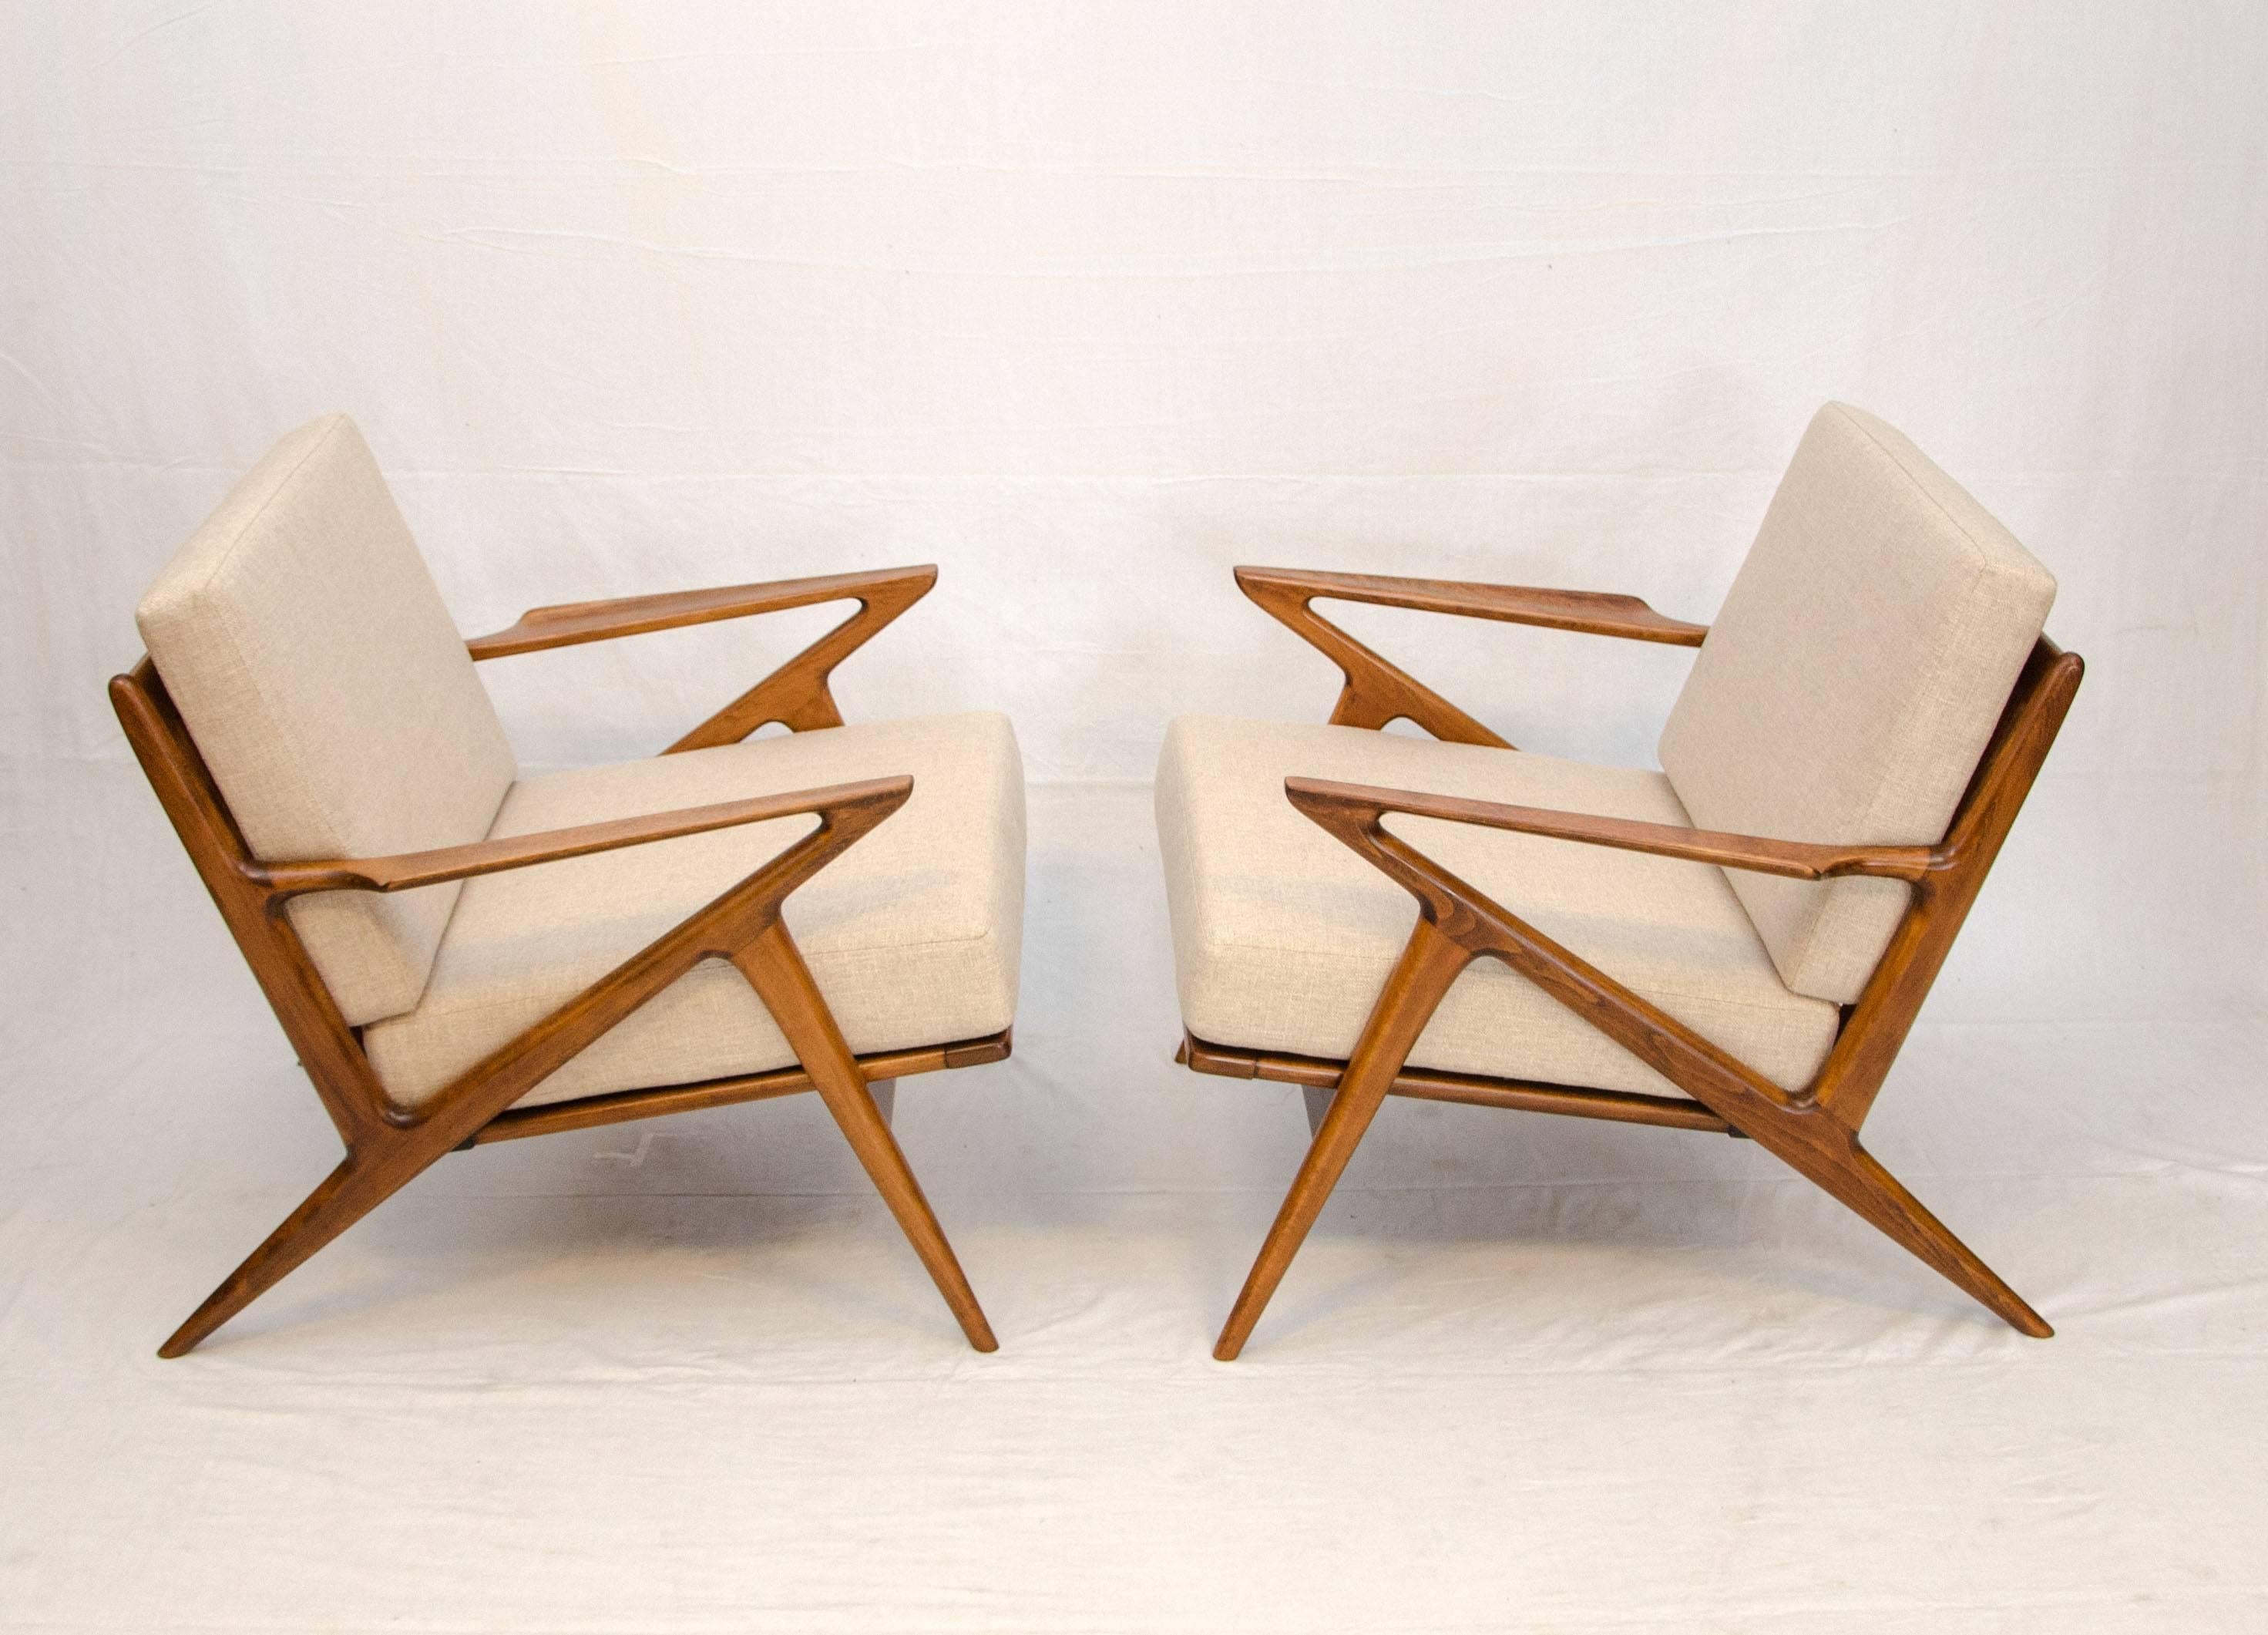 Popular iconic Danish "Z" lounge chairs designed by Poul Jensen for Selig. Both chairs retain the circular red and white Selig labels on the seats. The arms have the signature upturned edges, the chair design is very angular. The seat